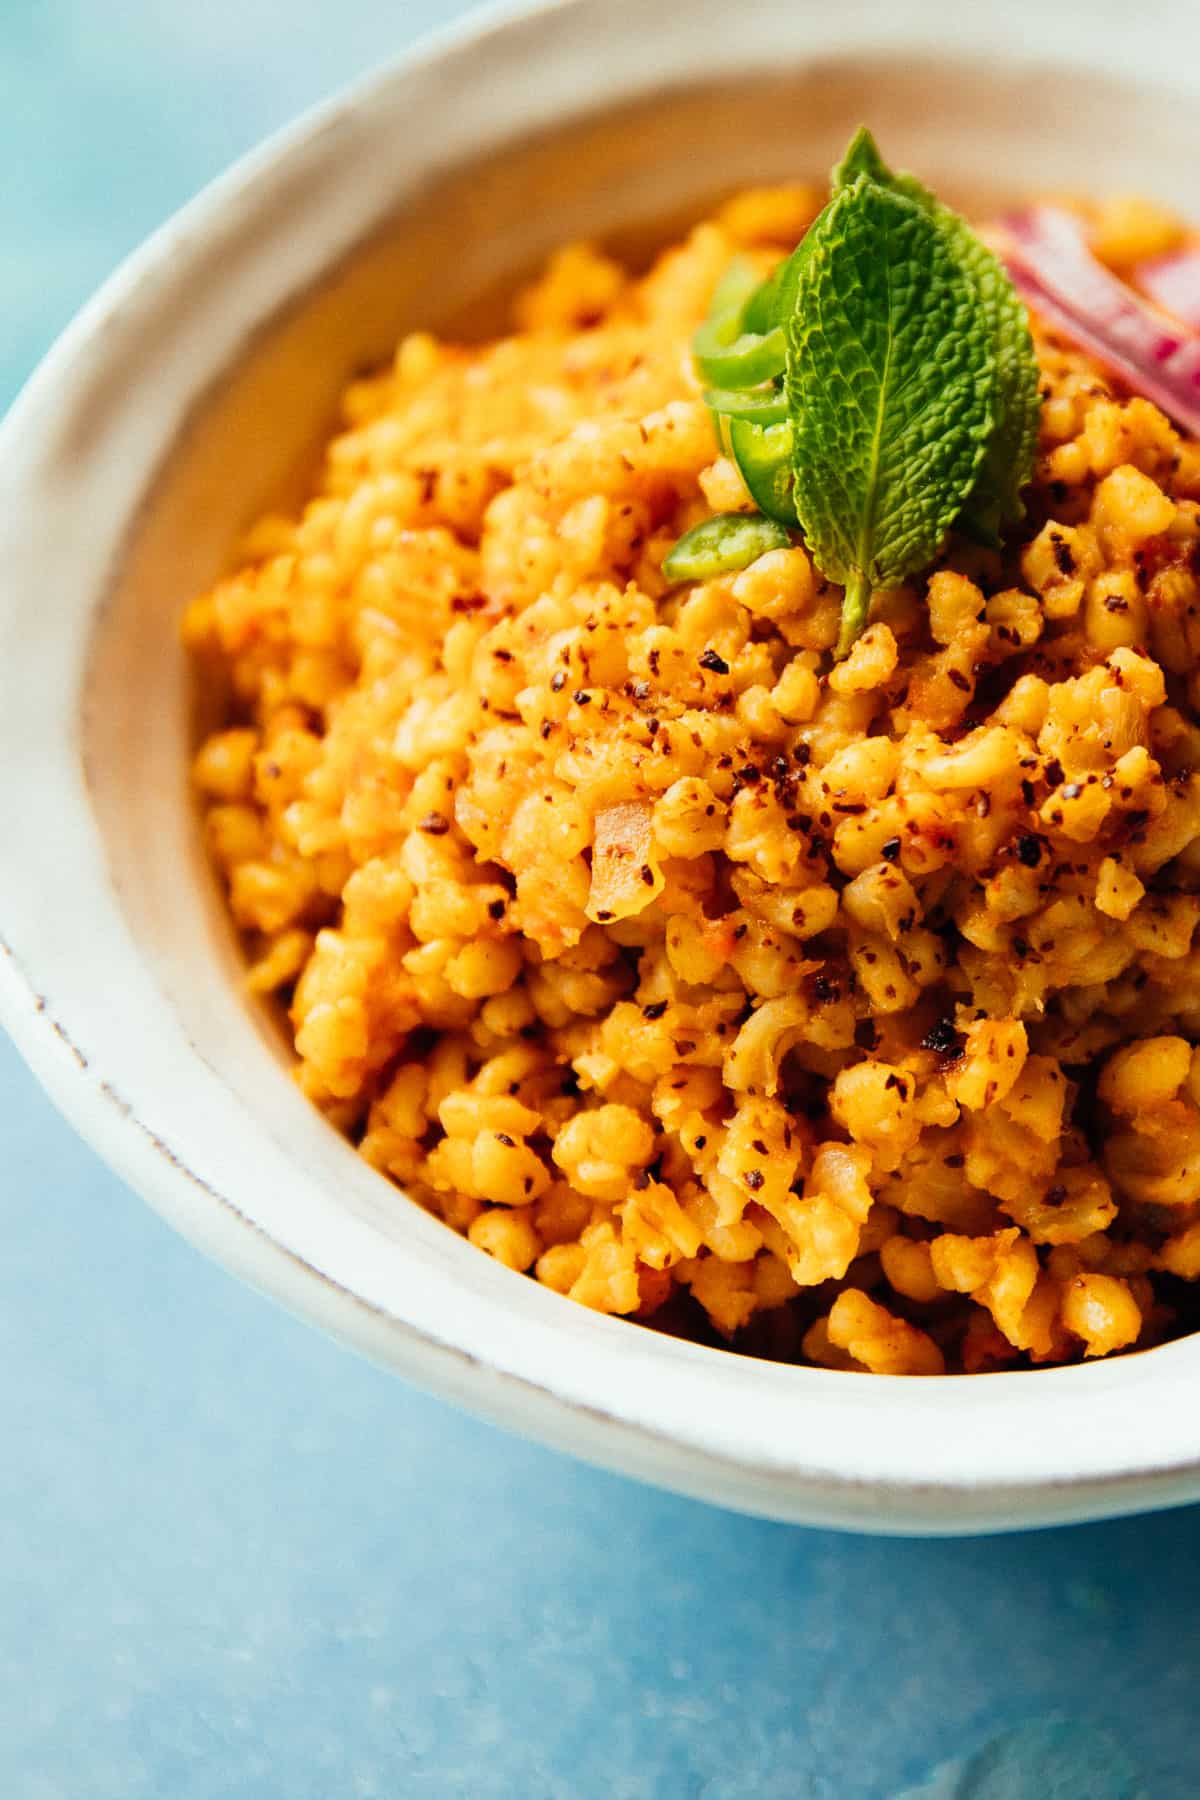 tomato bulgur pilaf with mint leaves and Aleppo pepper